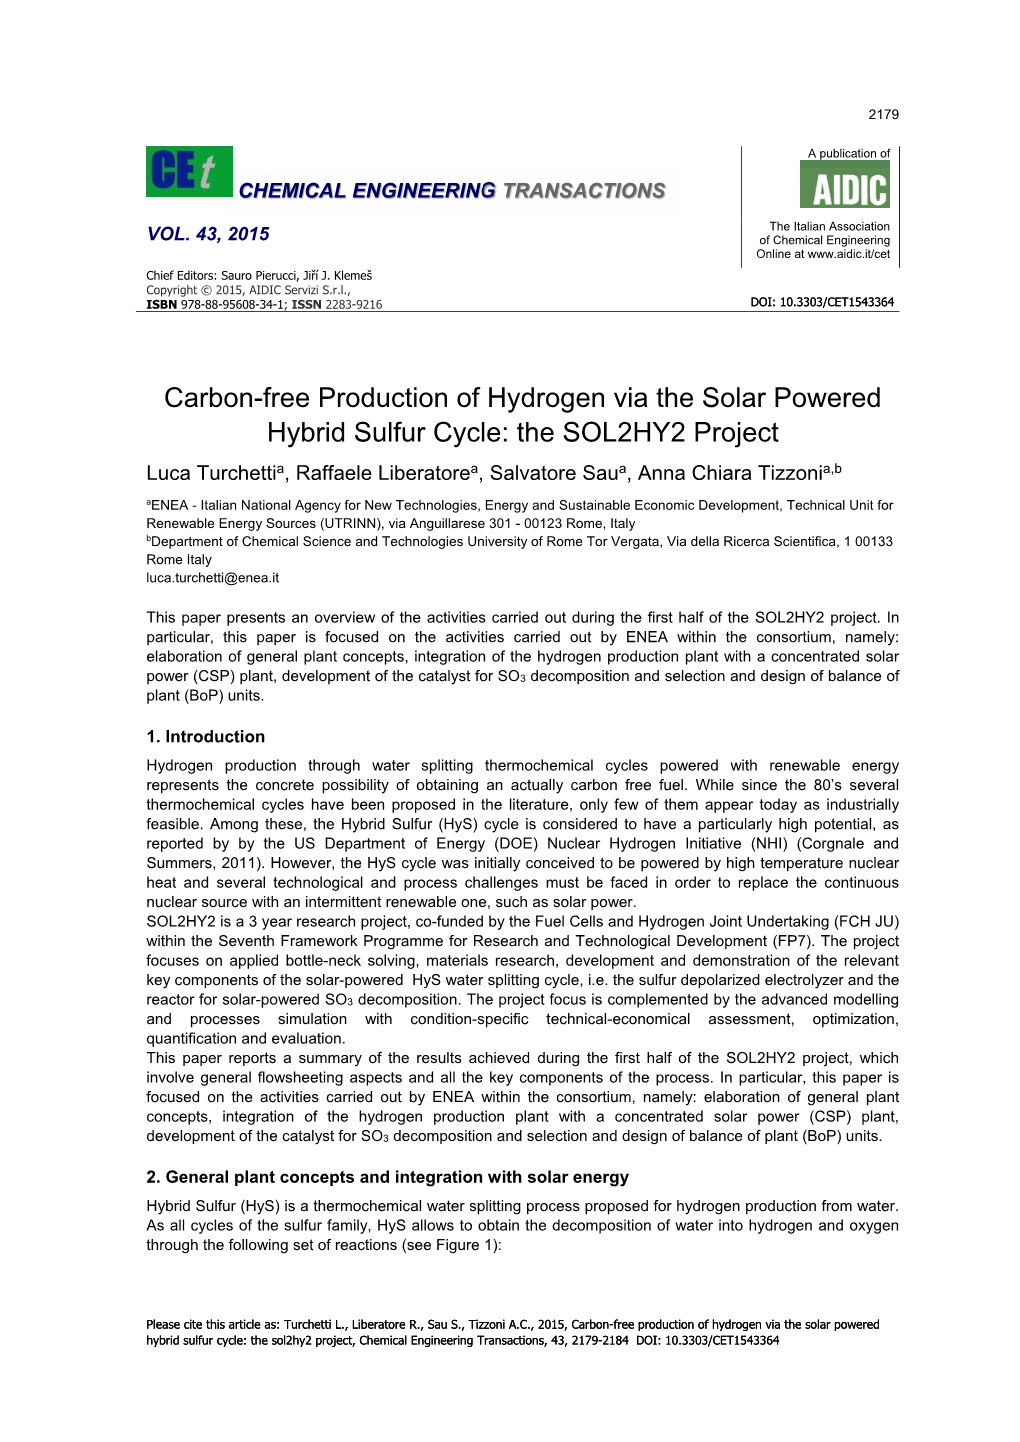 Carbon-Free Production of Hydrogen Via the Solar Powered Hybrid Sulfur Cycle: the SOL2HY2 Project